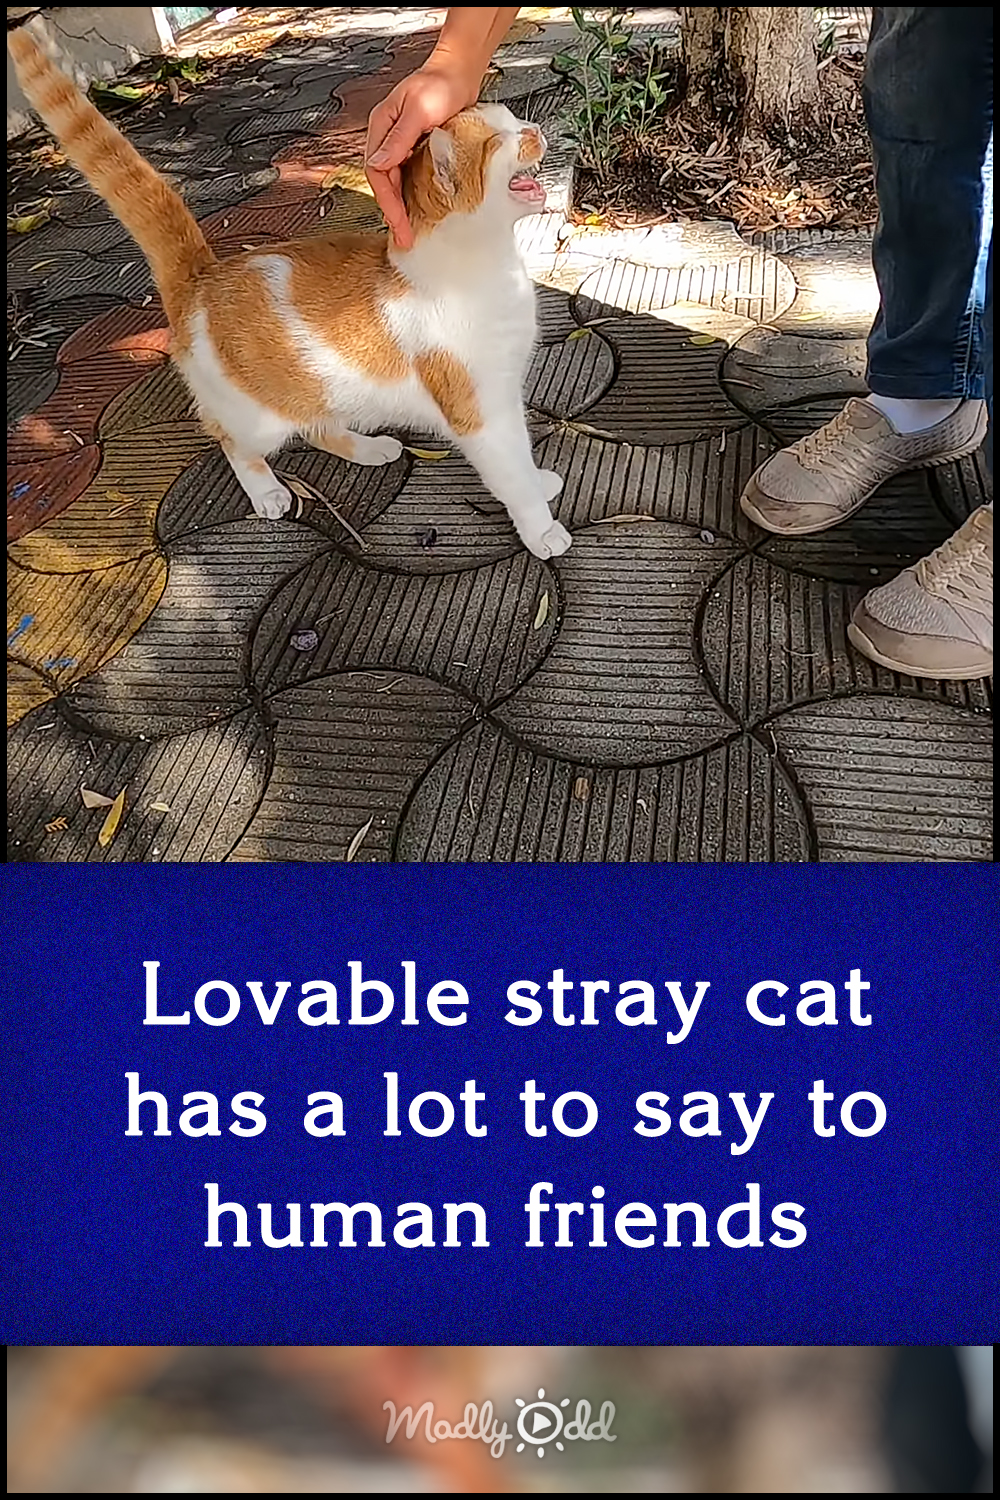 Lovable stray cat has a lot to say to human friends